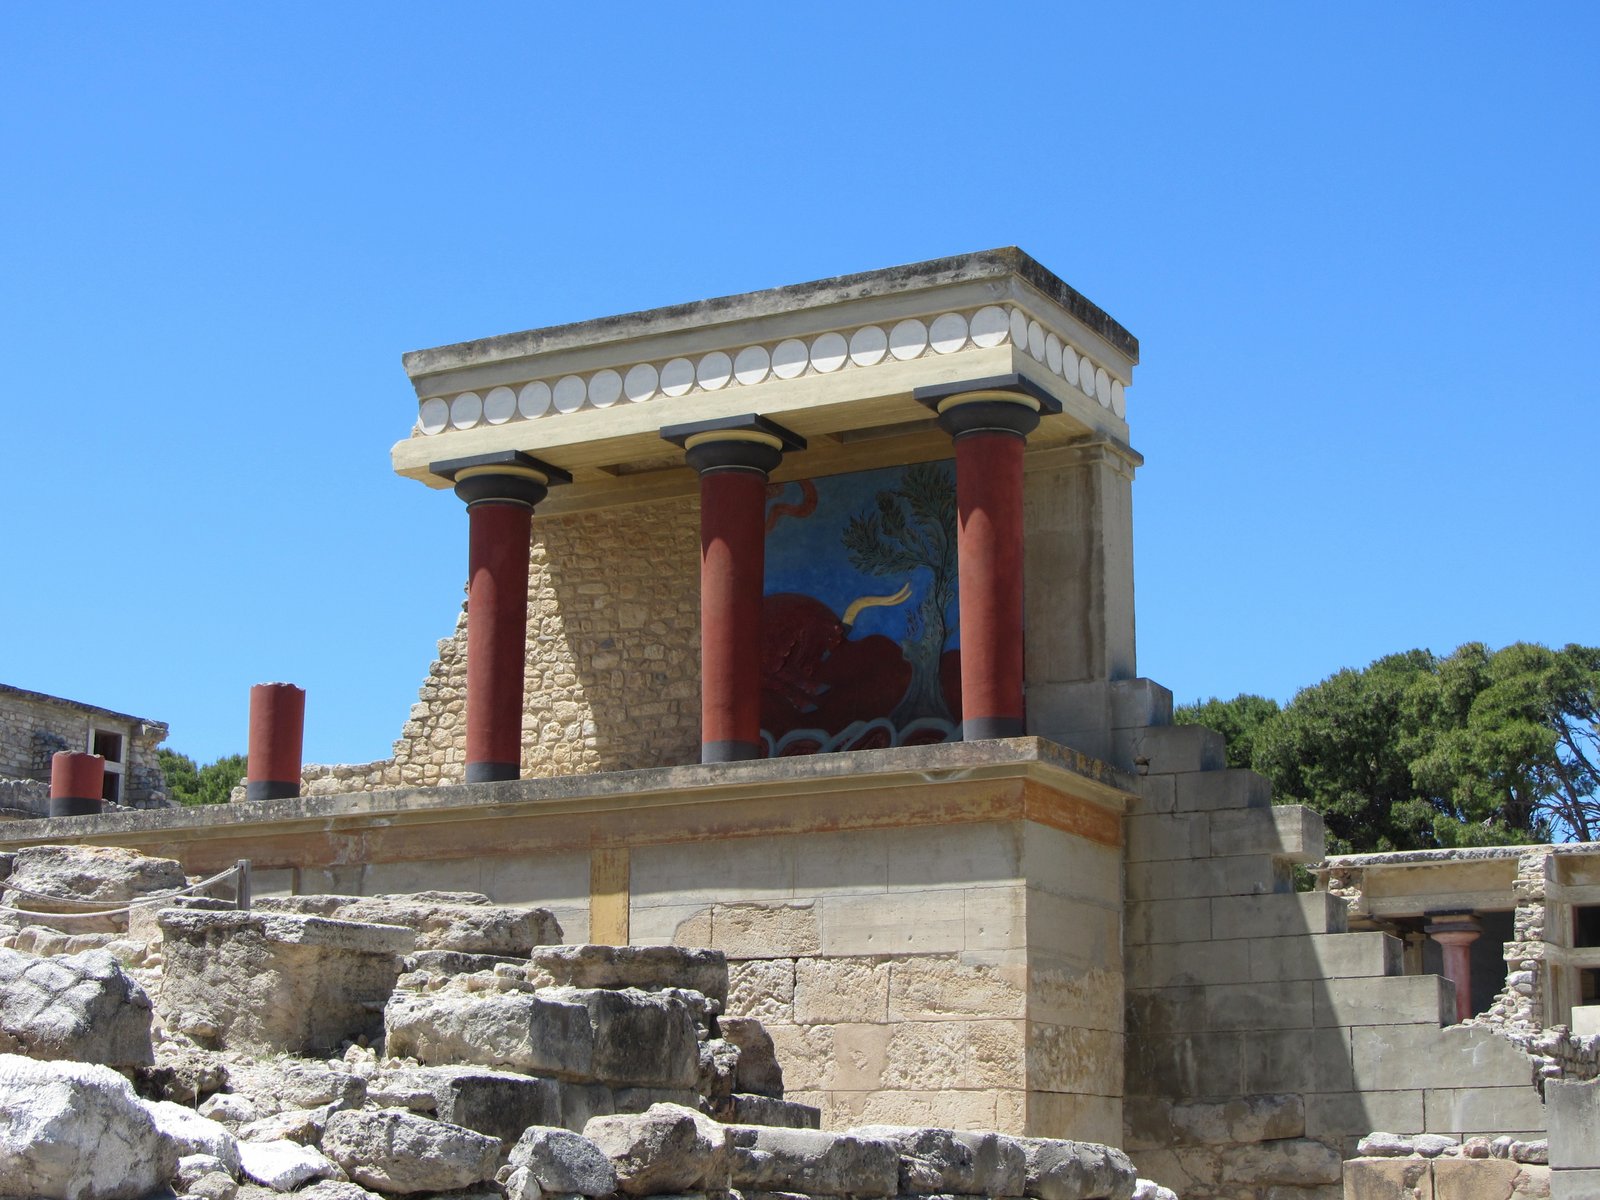 Ruins of the palace of Knossos on Crete